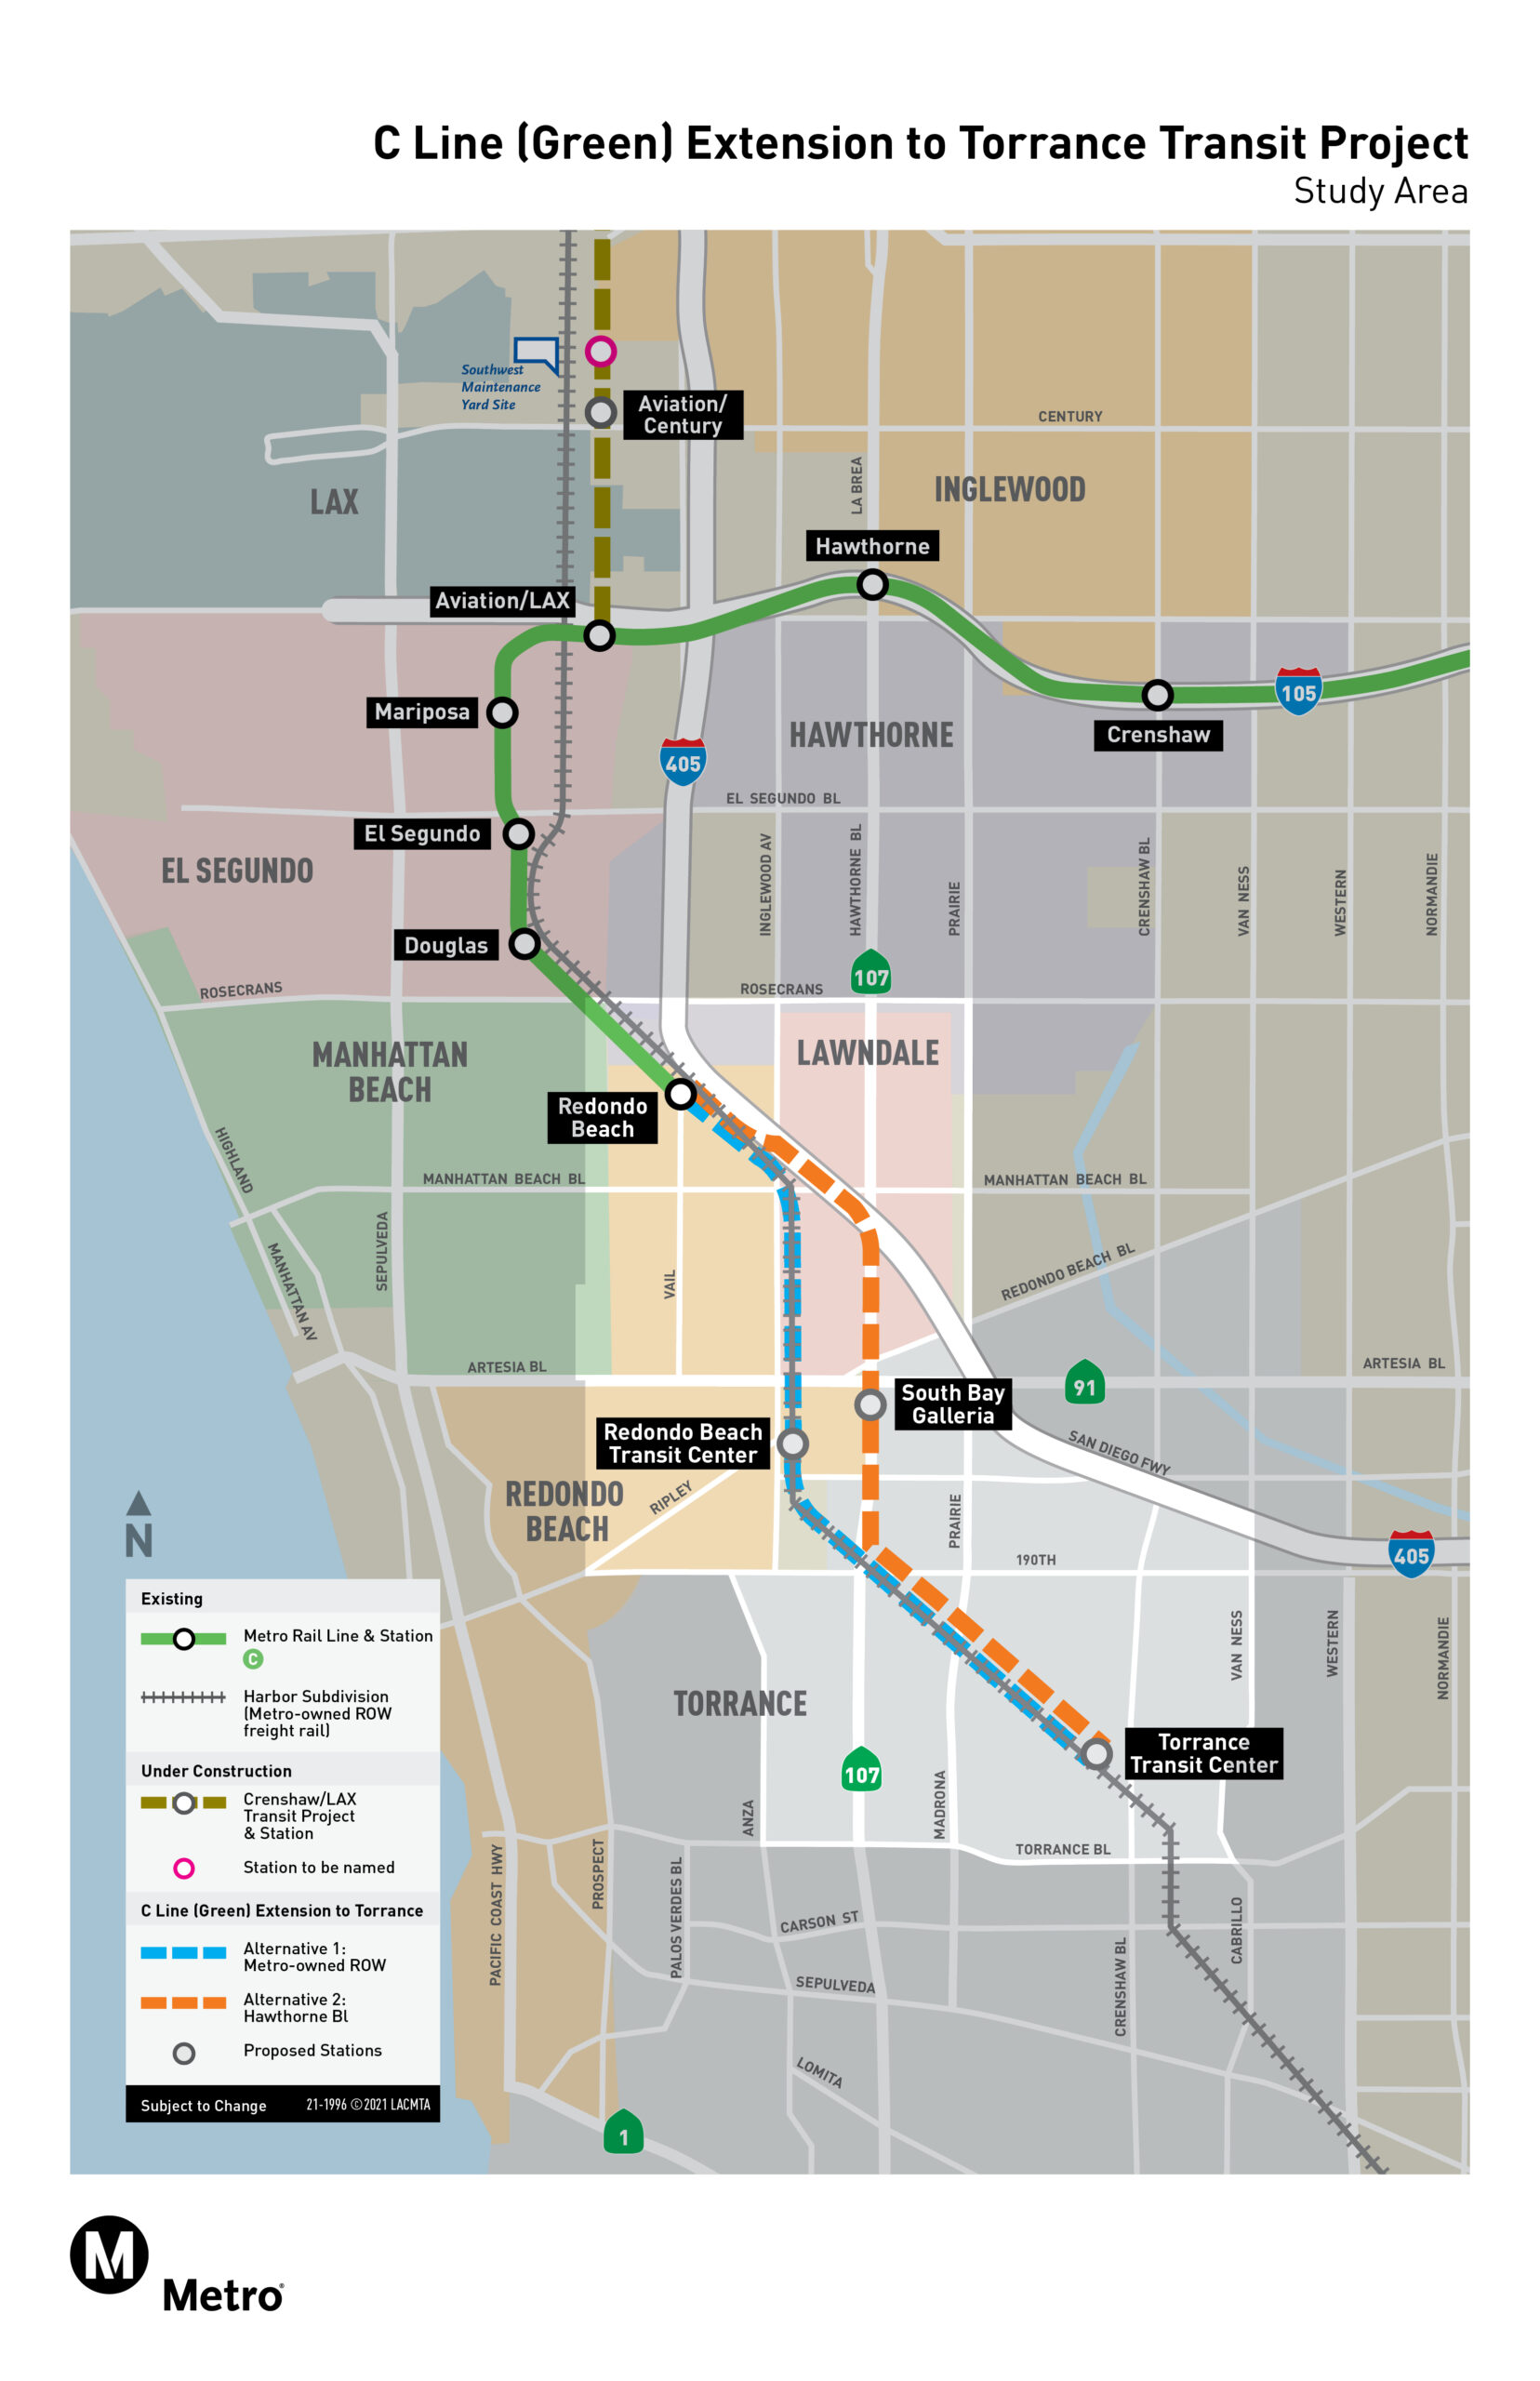 C Line (Green) Extension to Torrance Project Map